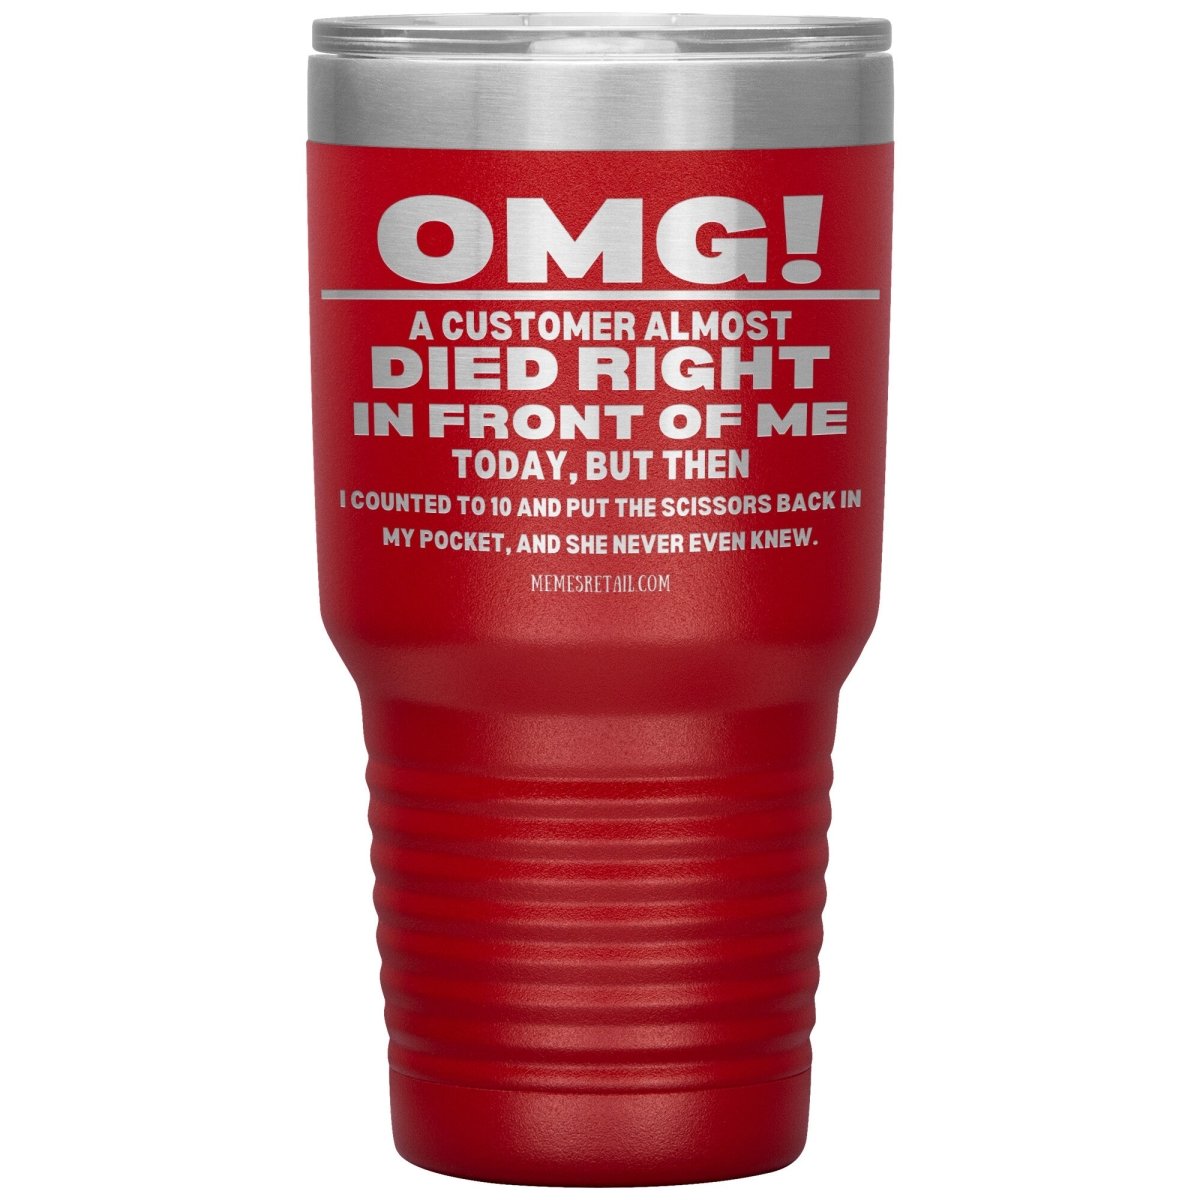 OMG! A Customer Almost Died Right In Front Of Me Tumbler, 30oz Insulated Tumbler / Red - MemesRetail.com